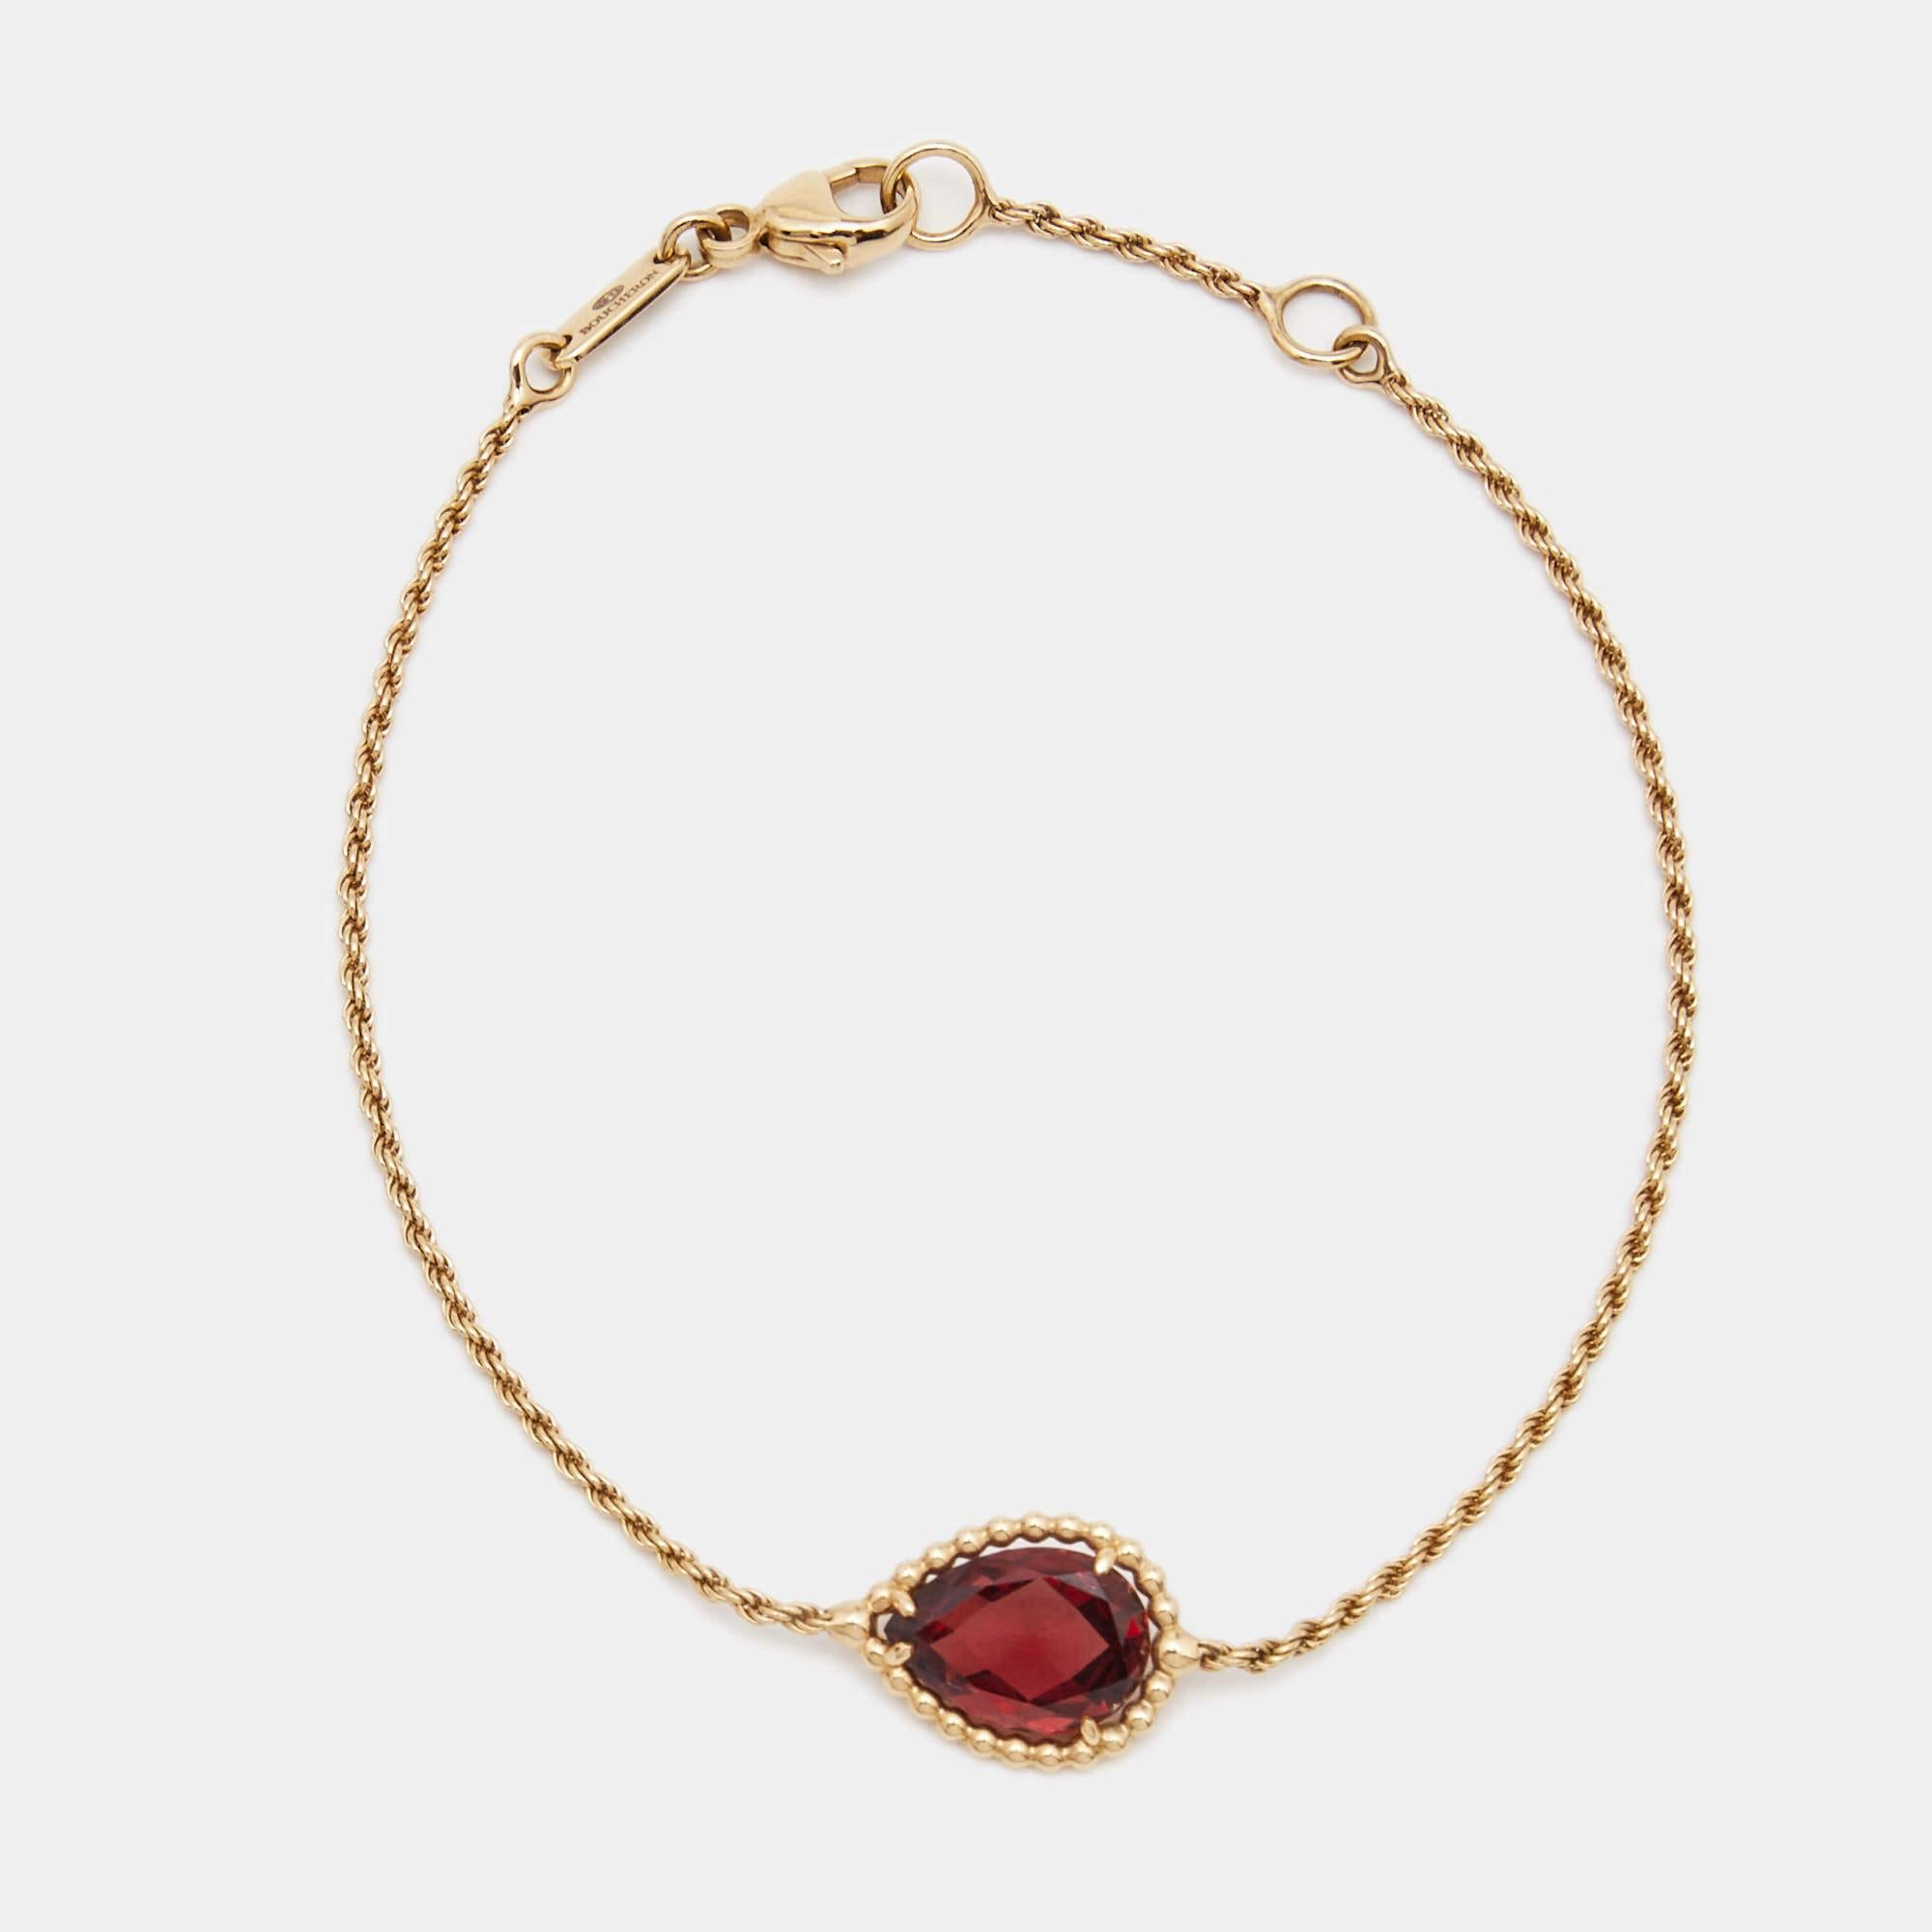 The Boucheron bracelet embodies timeless elegance and exquisite craftsmanship. Crafted in lustrous 18k rose gold, the bracelet showcases the iconic Serpent Bohème motif, inspired by the sinuous beauty of a serpent. Adorned with vibrant rhodolite,